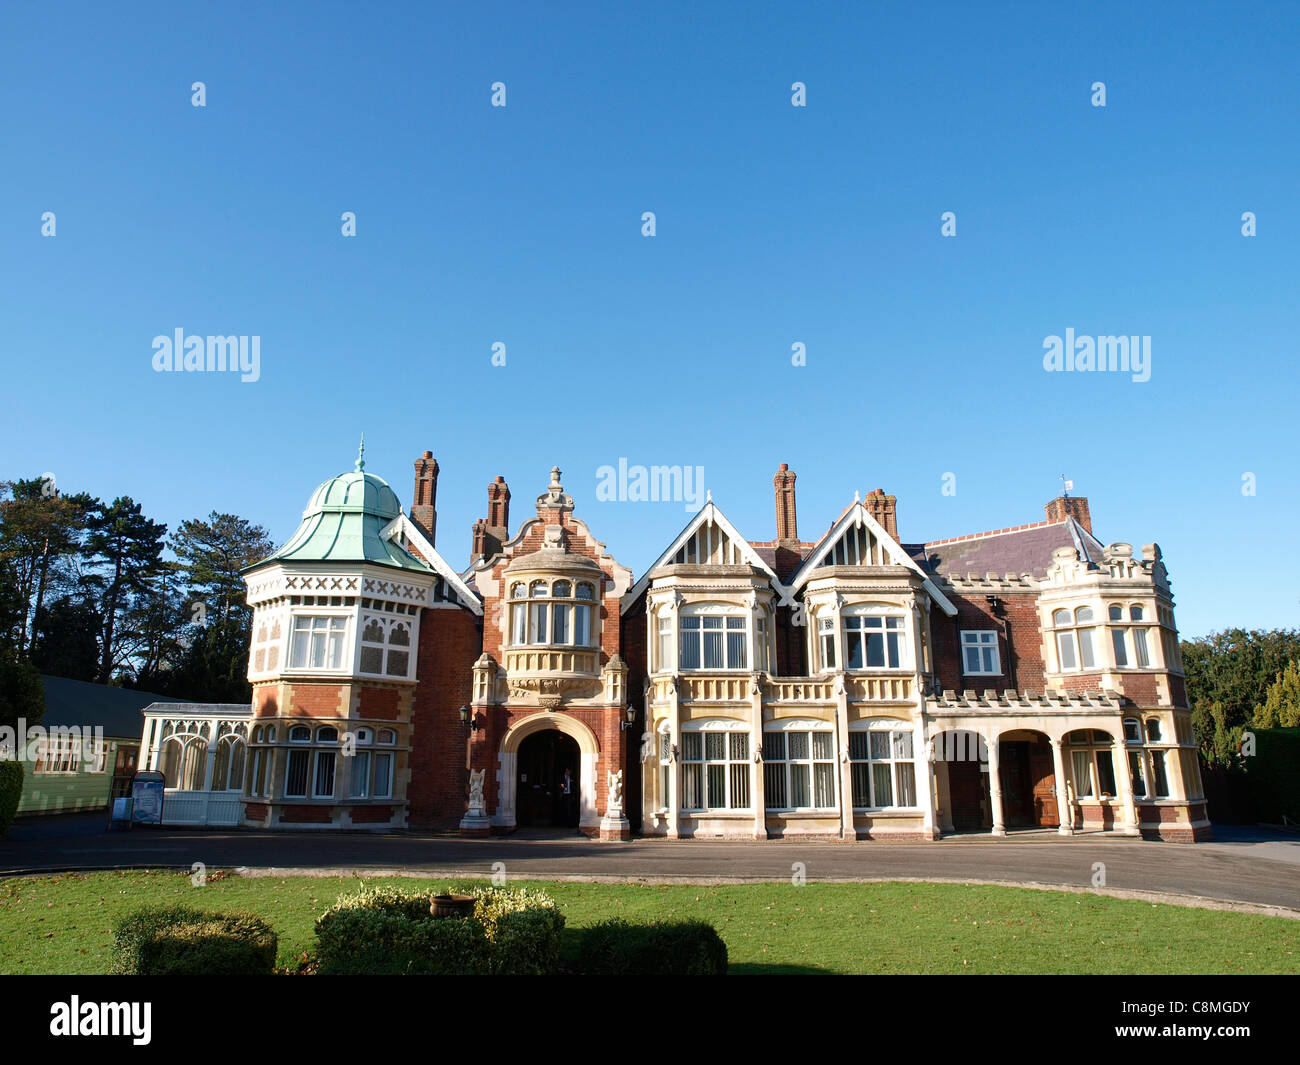 The Mansion, Bletchley Park, Bletchley. Home of the WWII codebreakers who cracked Enigma and other codes. Stock Photo